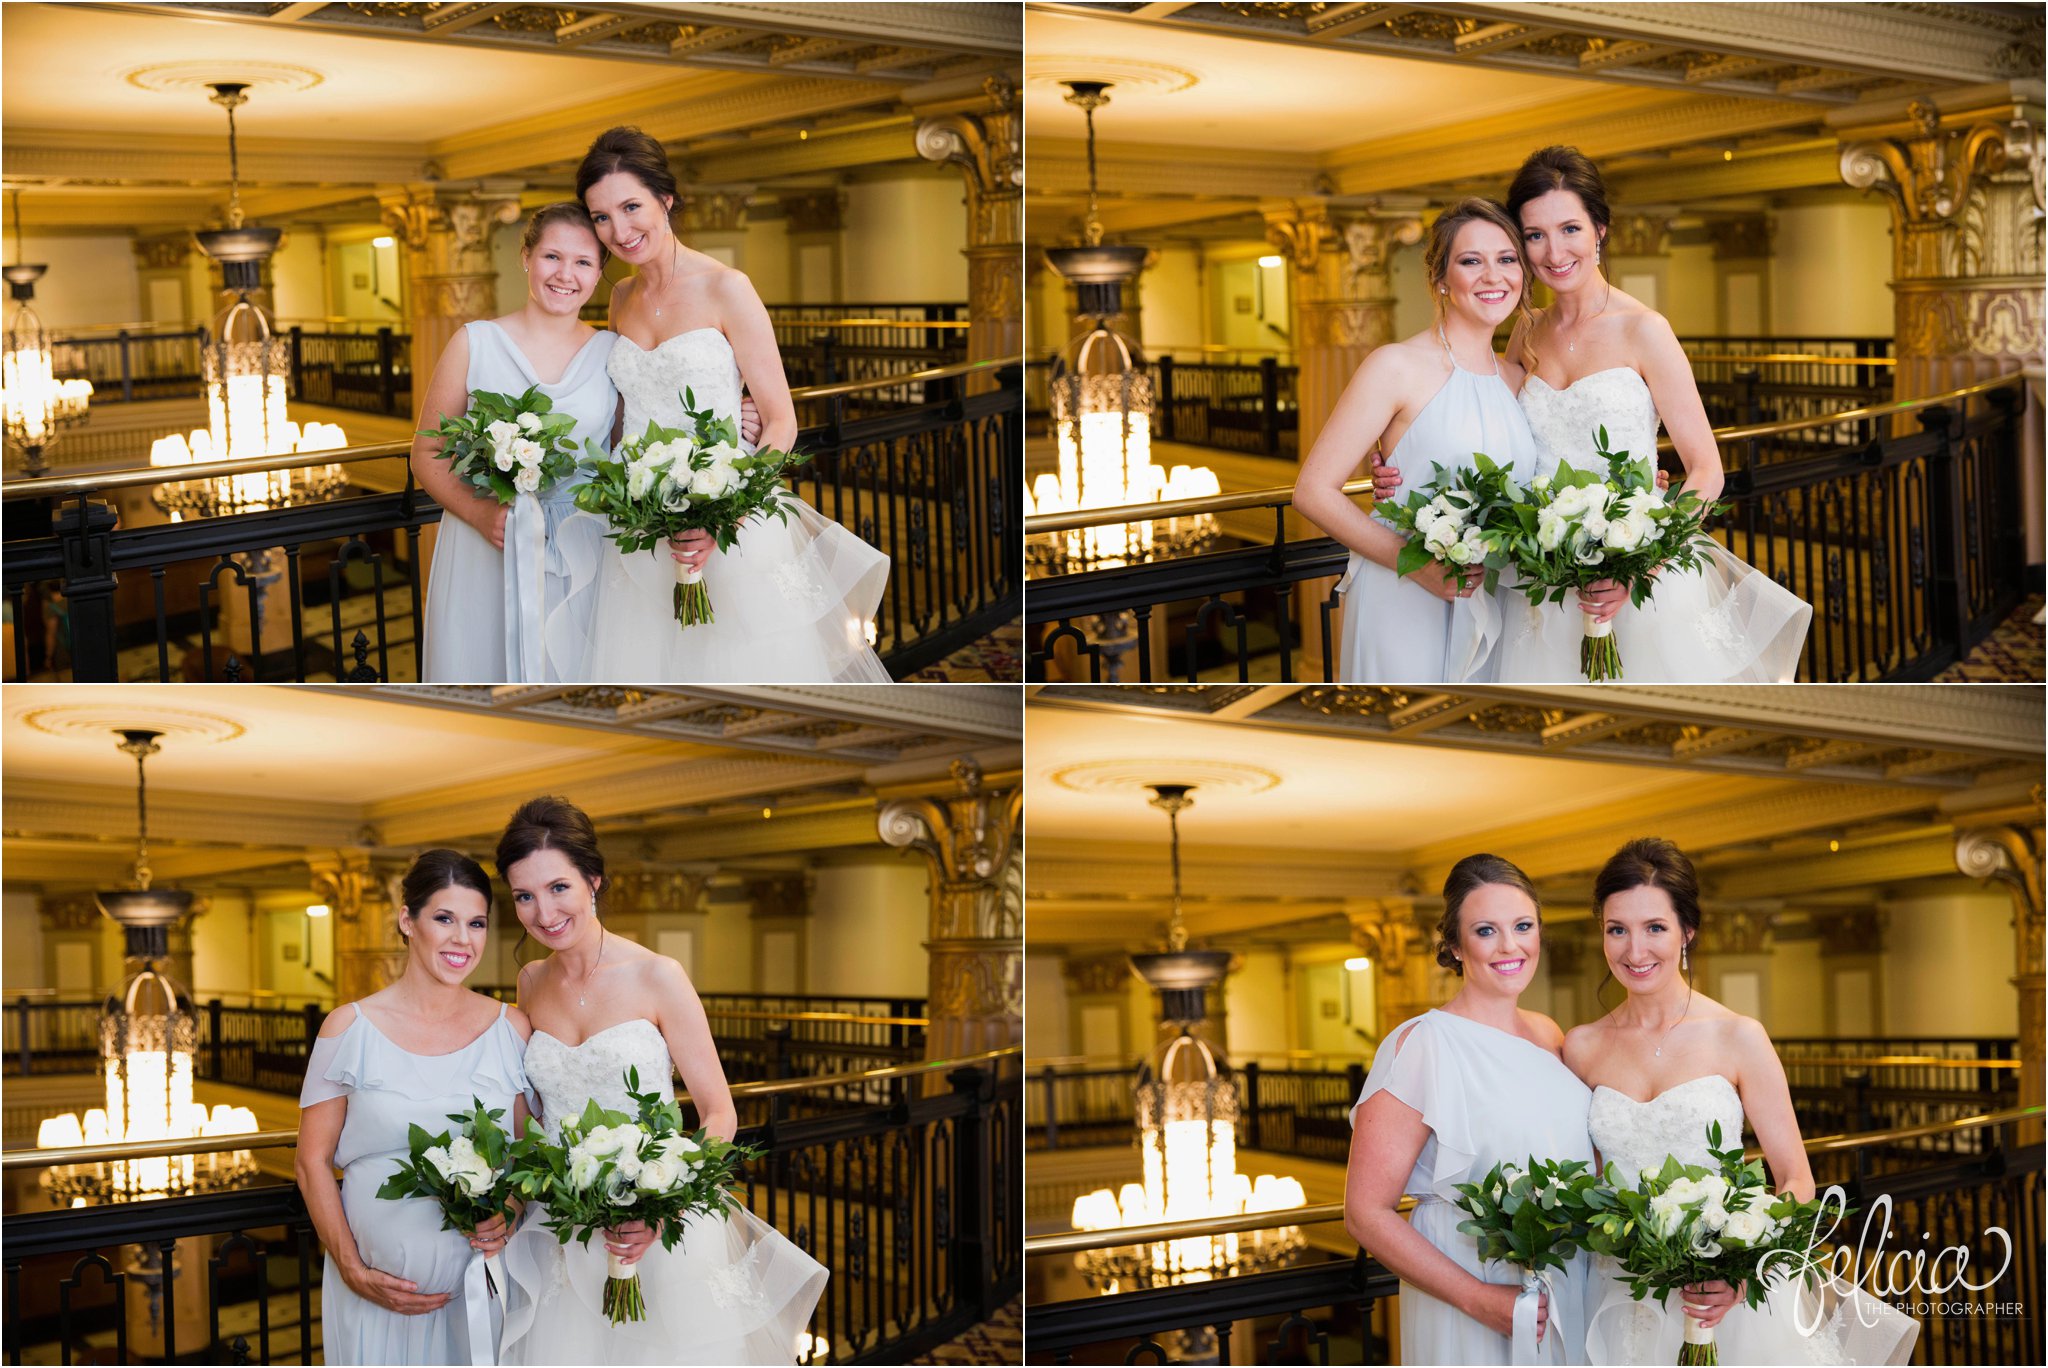 Grace and Holy Trinity Cathedral Wedding Photos | Kansas City | Bride with Each Bridesmaid | The President Hotel | Images by www.feliciathephotographer.com